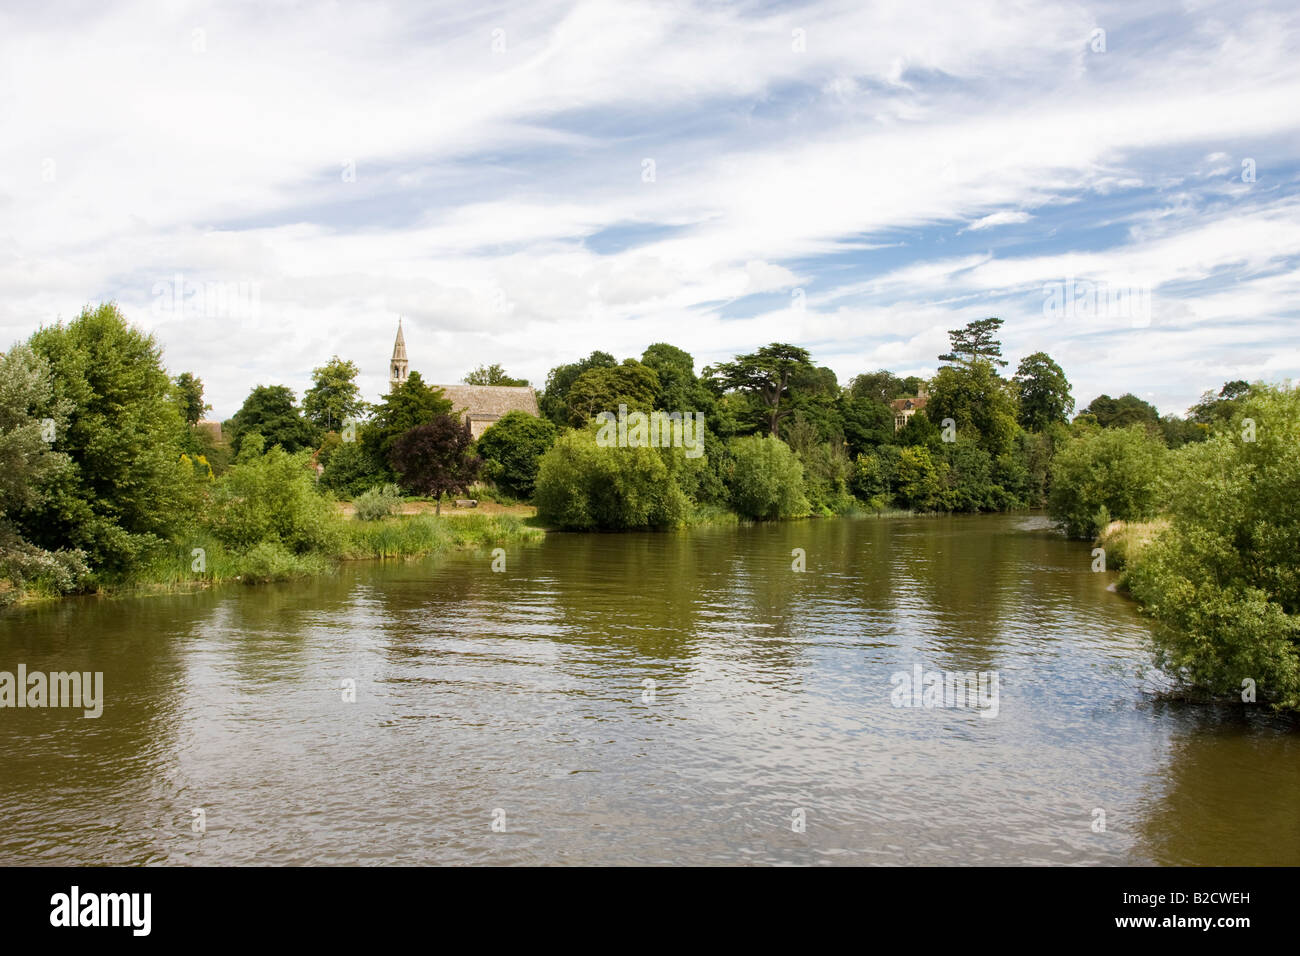 River Thames or Isis at Clifton Hampden Oxfordshire with a view of the Church of St Michaels and All Angels Stock Photo